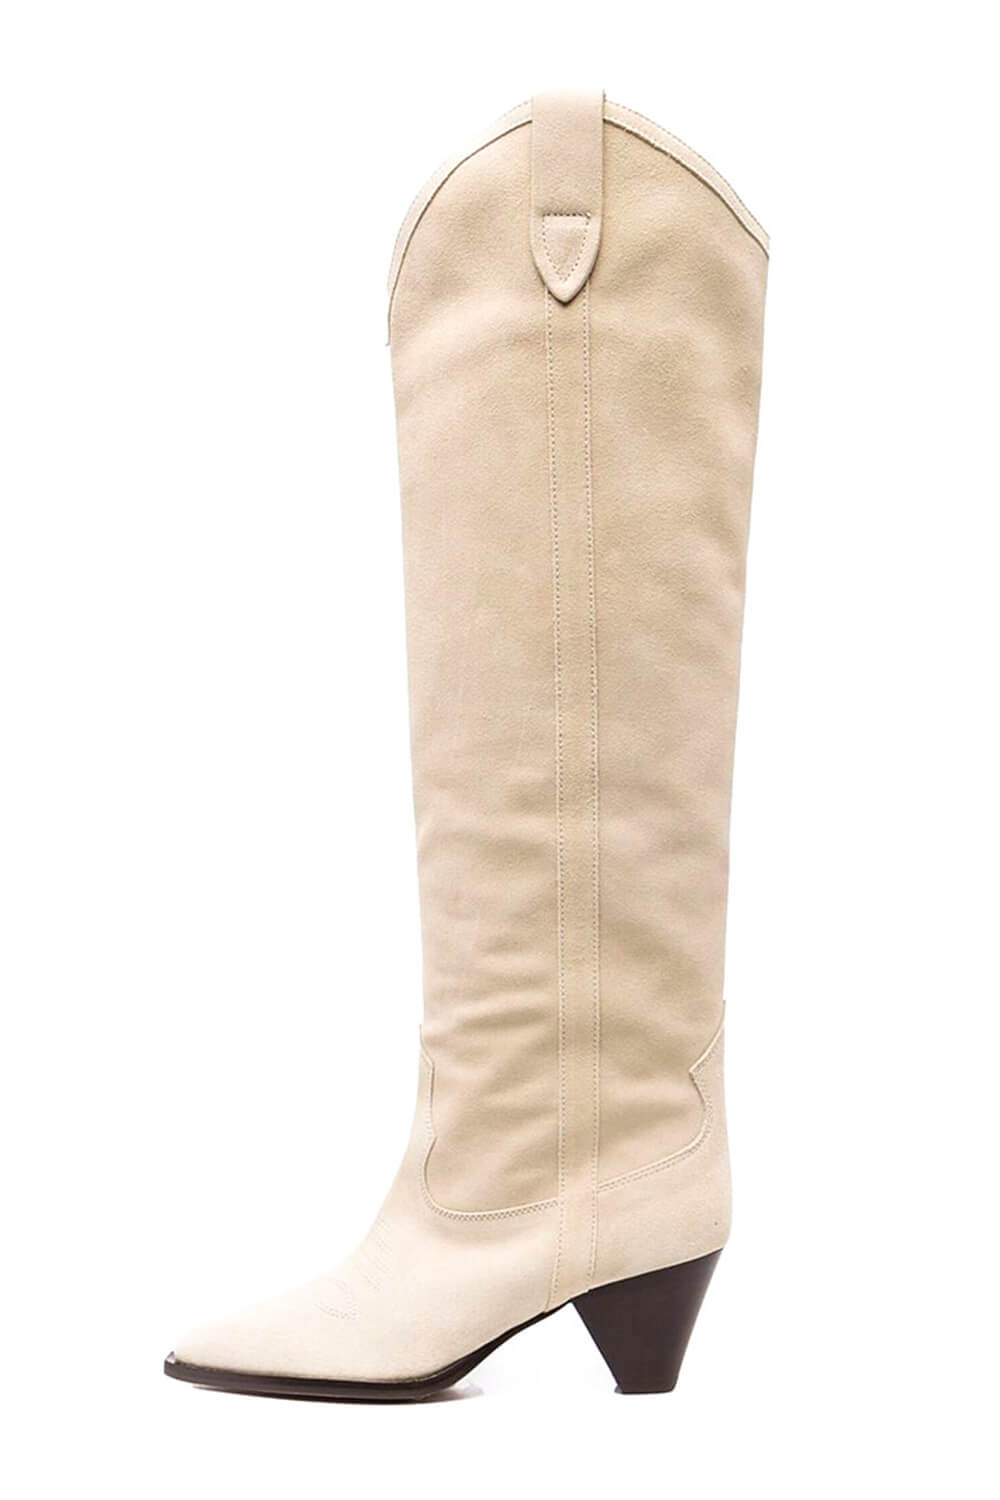 Suede Pointed Toe Western Cowboy Knee High Boots - Beige